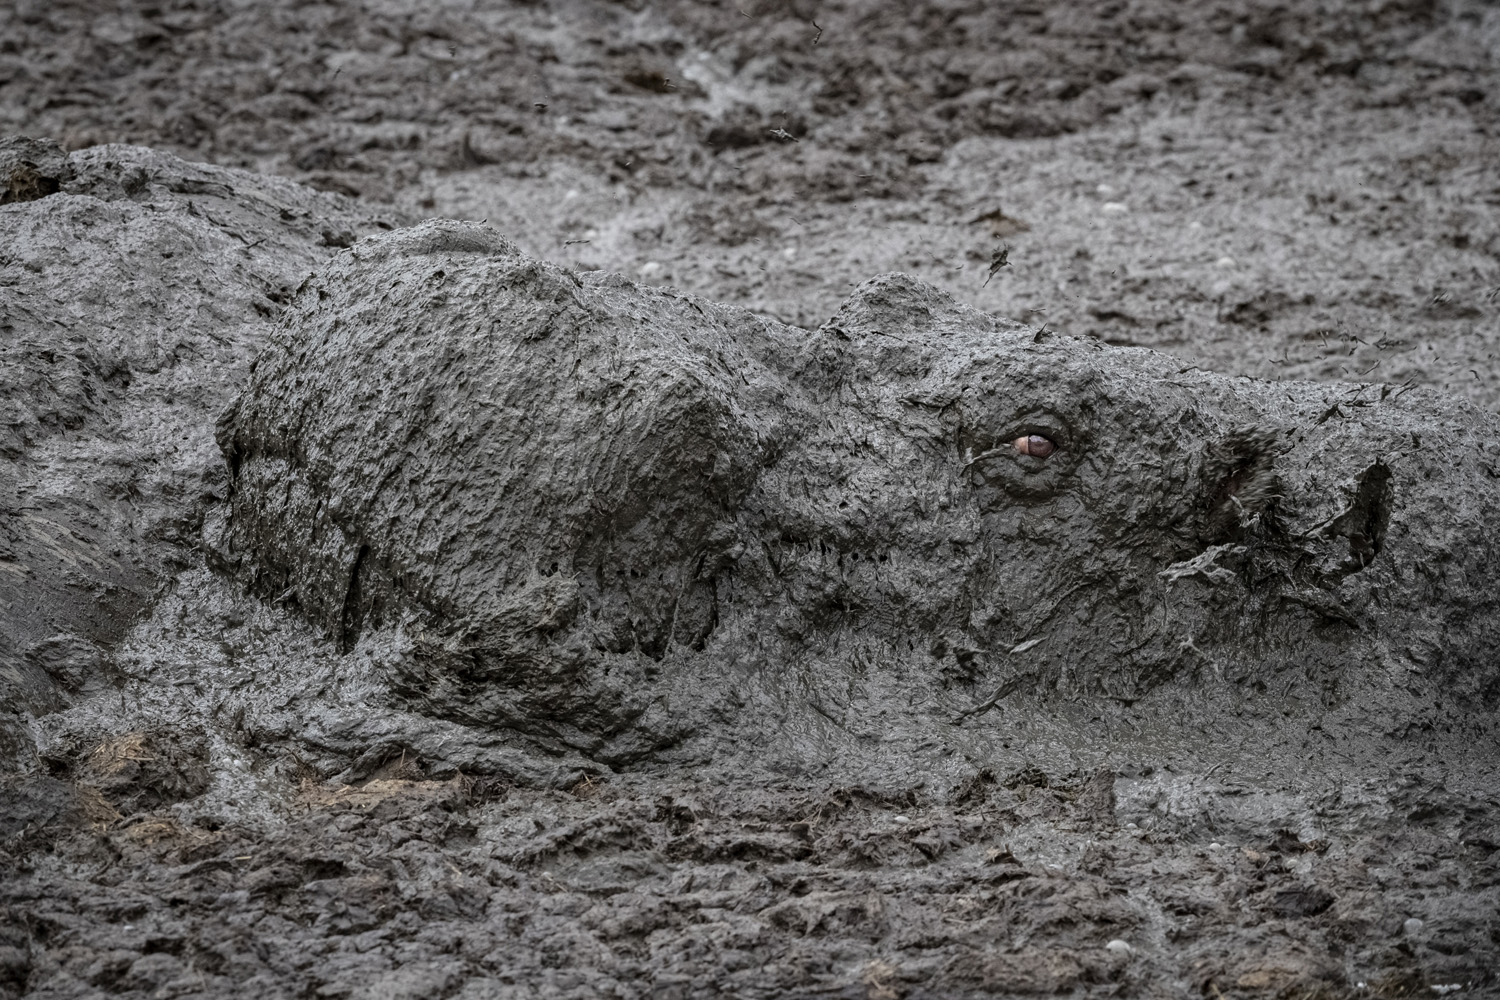 Jose Fragozo won the 'Living World: Best Single Image' category of 2021 TPOTY with this image of a hippo emerging from mud at the Masai Mara National Reserve, Kenya